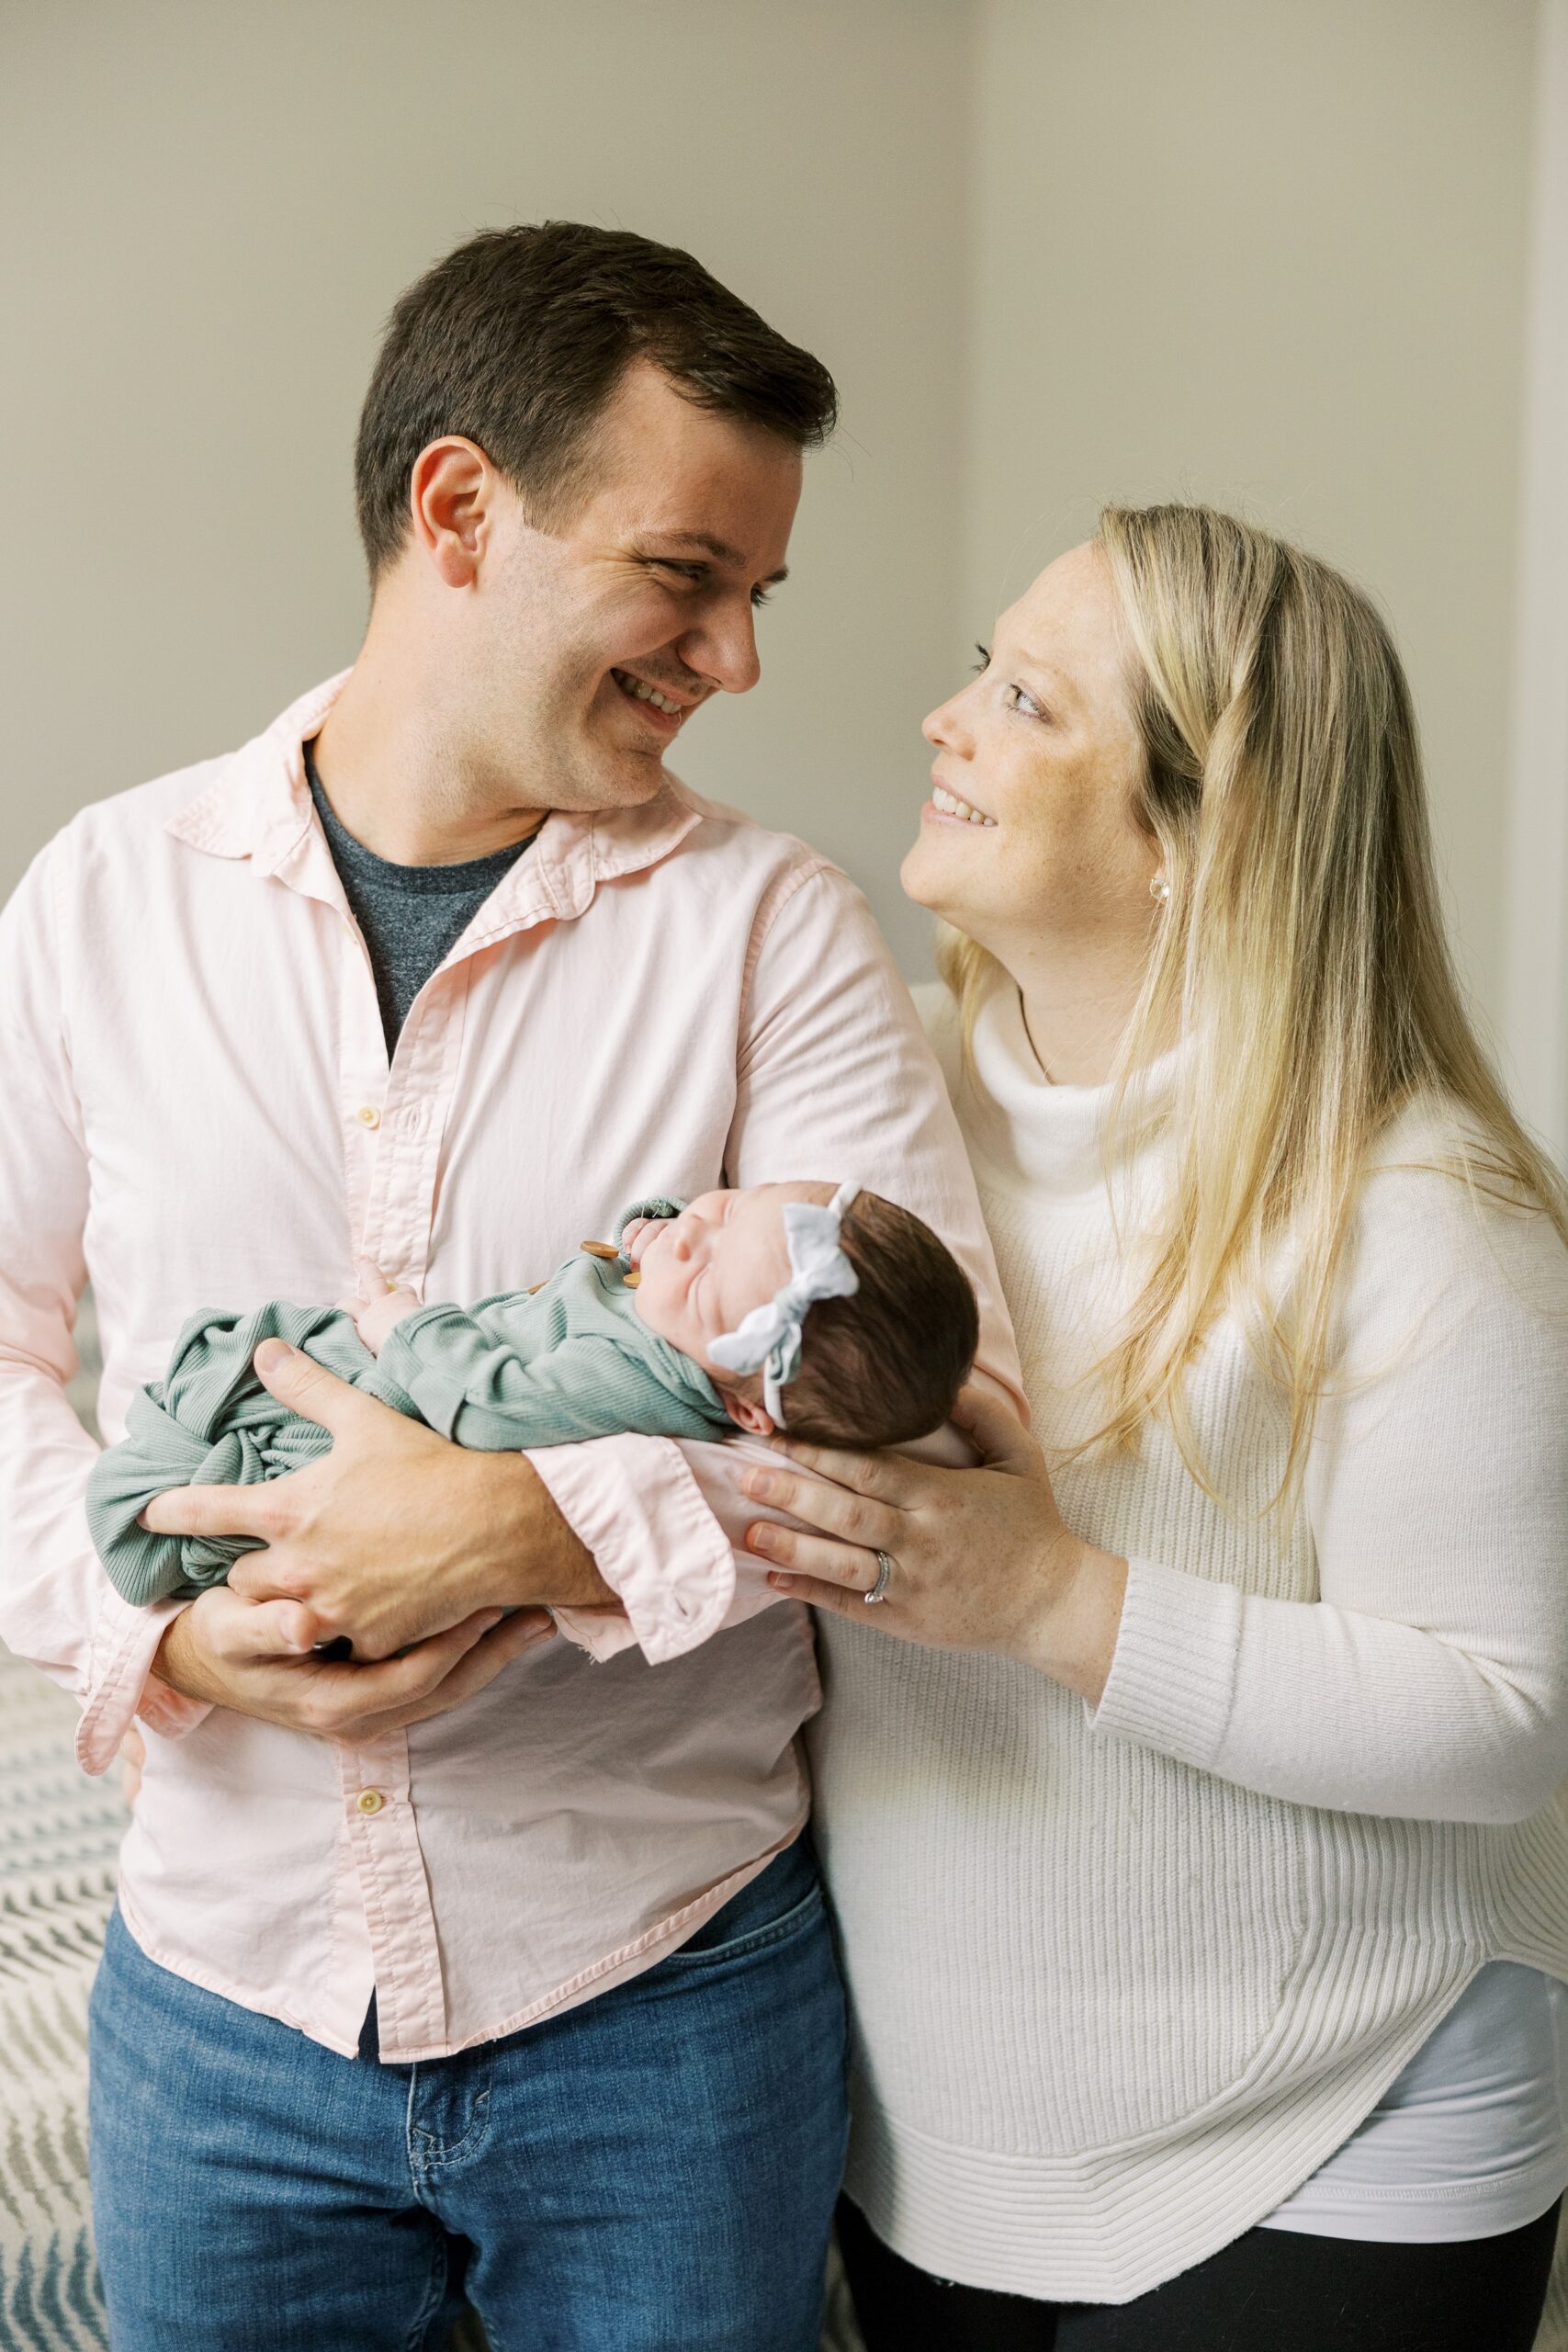 Man and woman smile at each other during at home newborn photo session